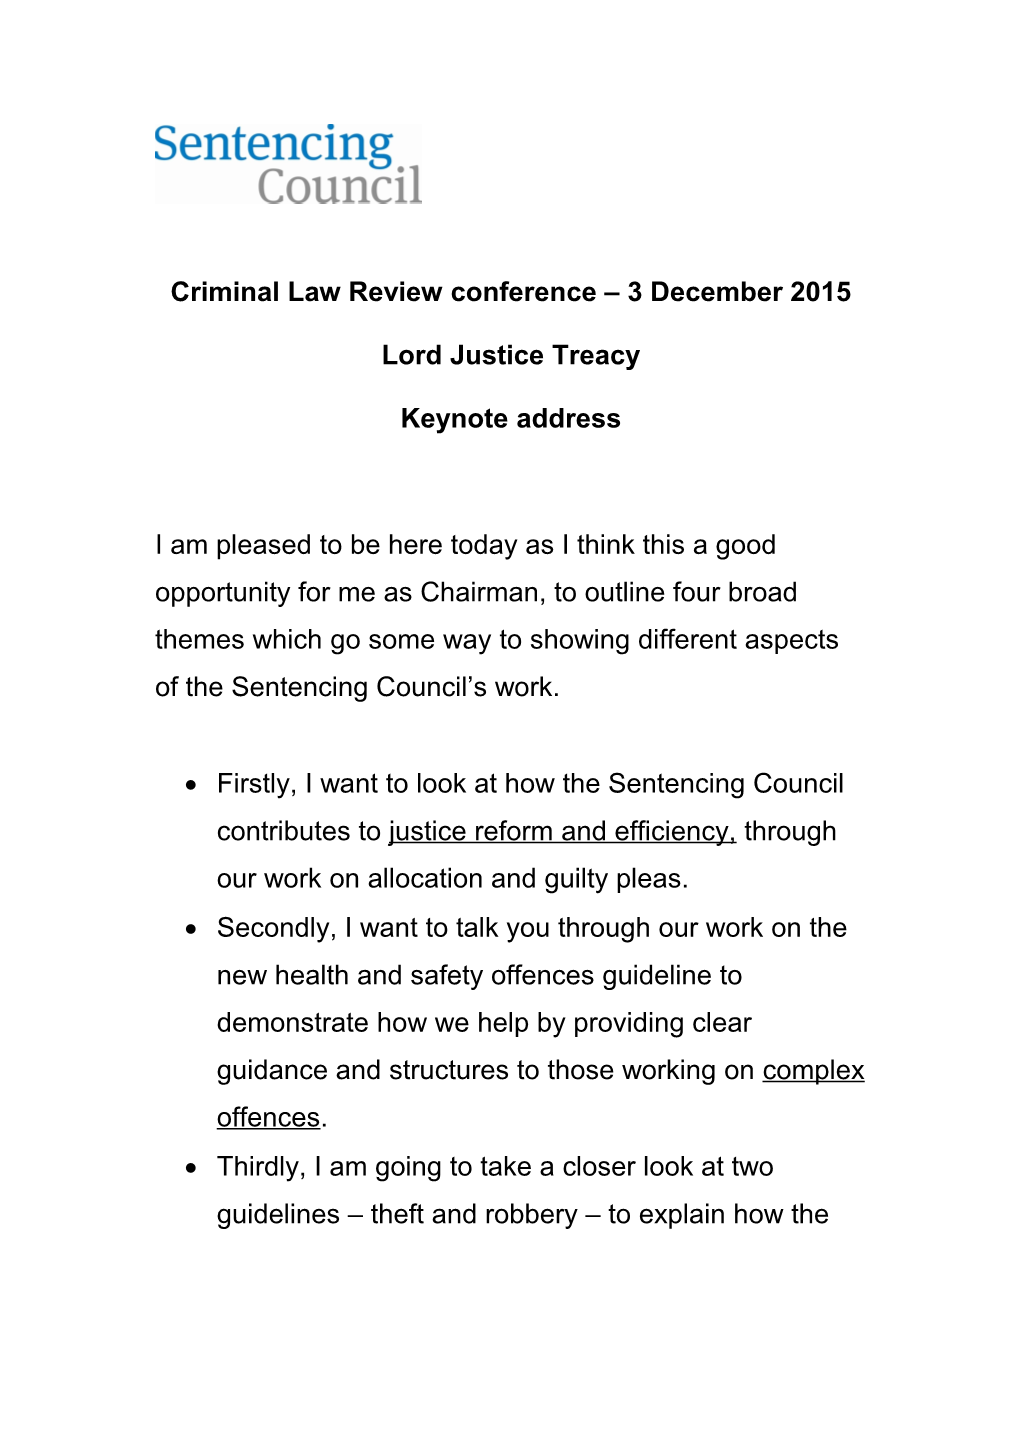 Criminal Law Review Conference 3 December 2015